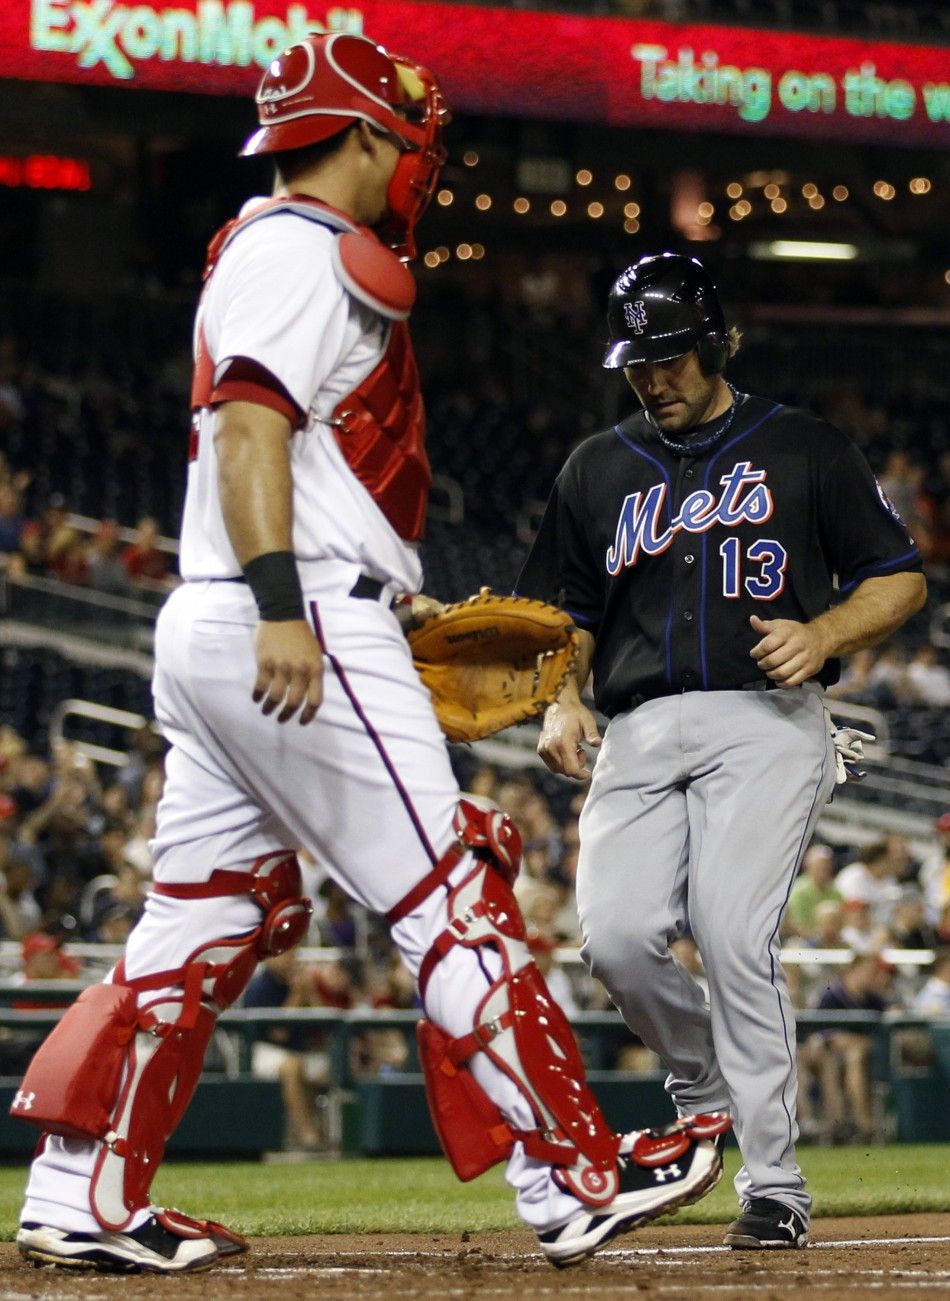 New York Mets catcher Mike Nickeas comes into to score on a base hit by Mets Justin Turner in front of Washington Nationals catcher Wilson Ramos during the third inning of their MLB National League baseball game in Washington